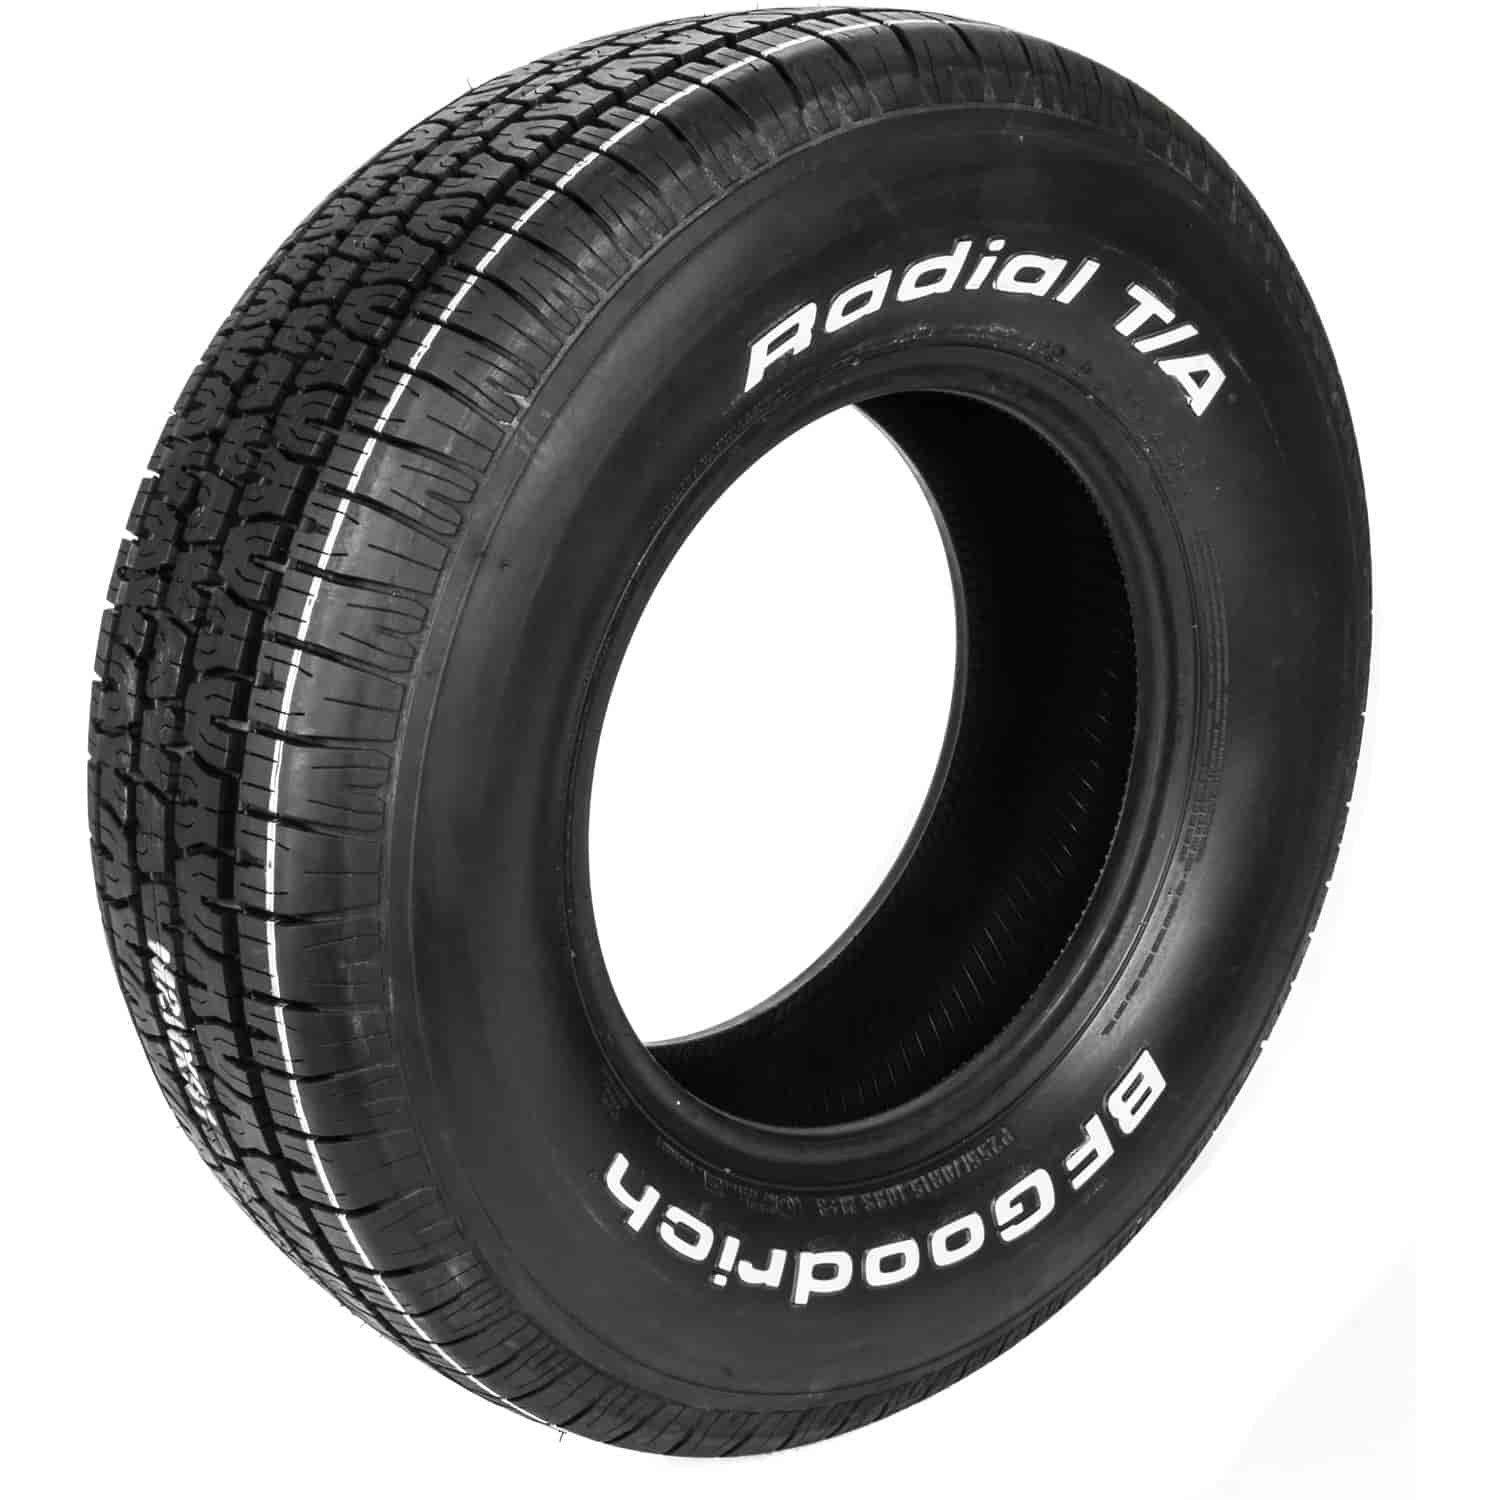 Radial T/A Tire P255/70R15